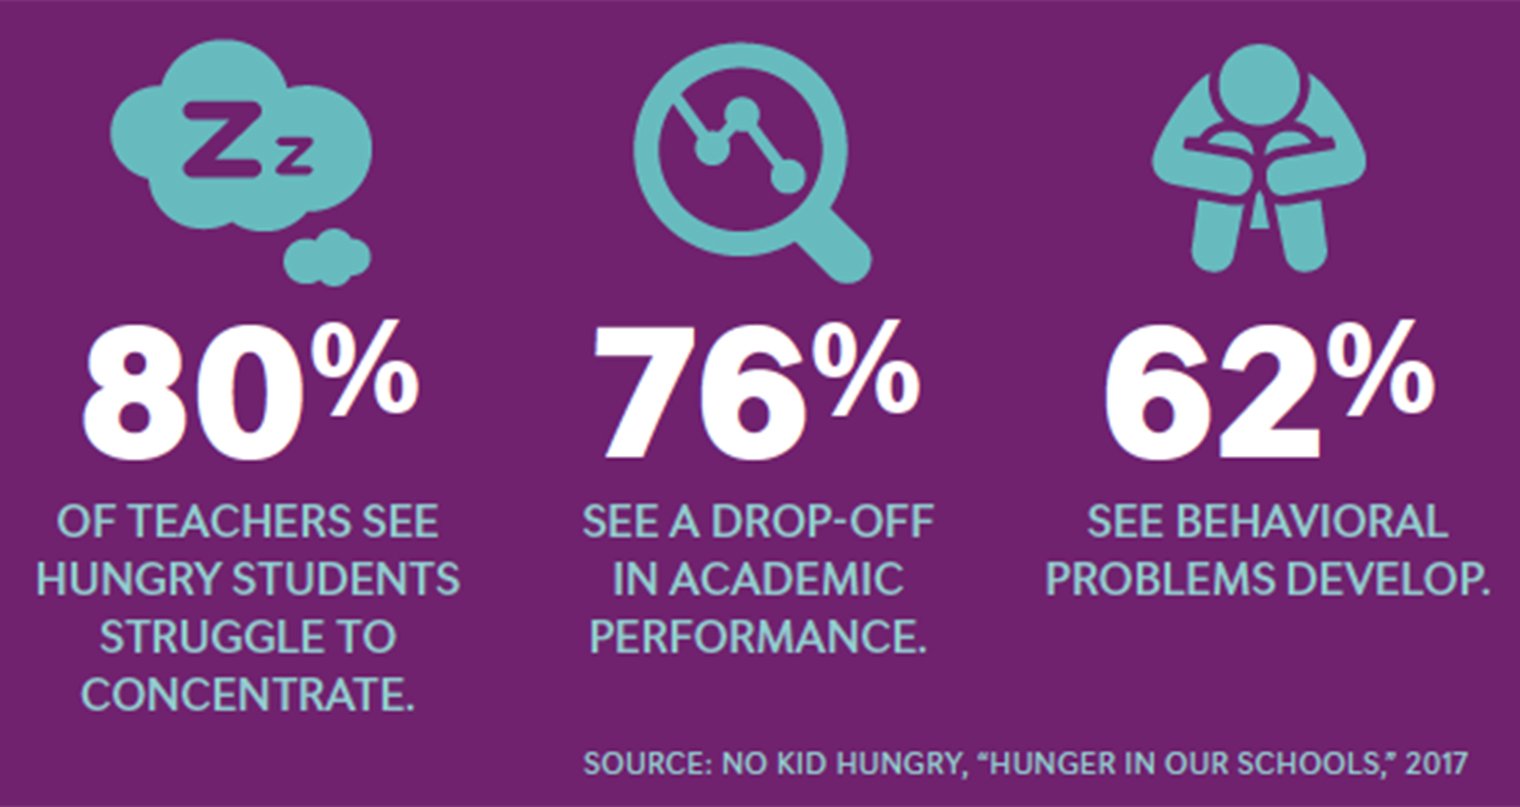 80% of teachers see hungry students struggle to concentrate. 76% see a drop-off in academic performance. 62% see behavioral problems develop.
Source: https://www.nea.org/nea-today/all-news-articles/child-hunger-exploding-and-public-schools-cant-fix-it-alone